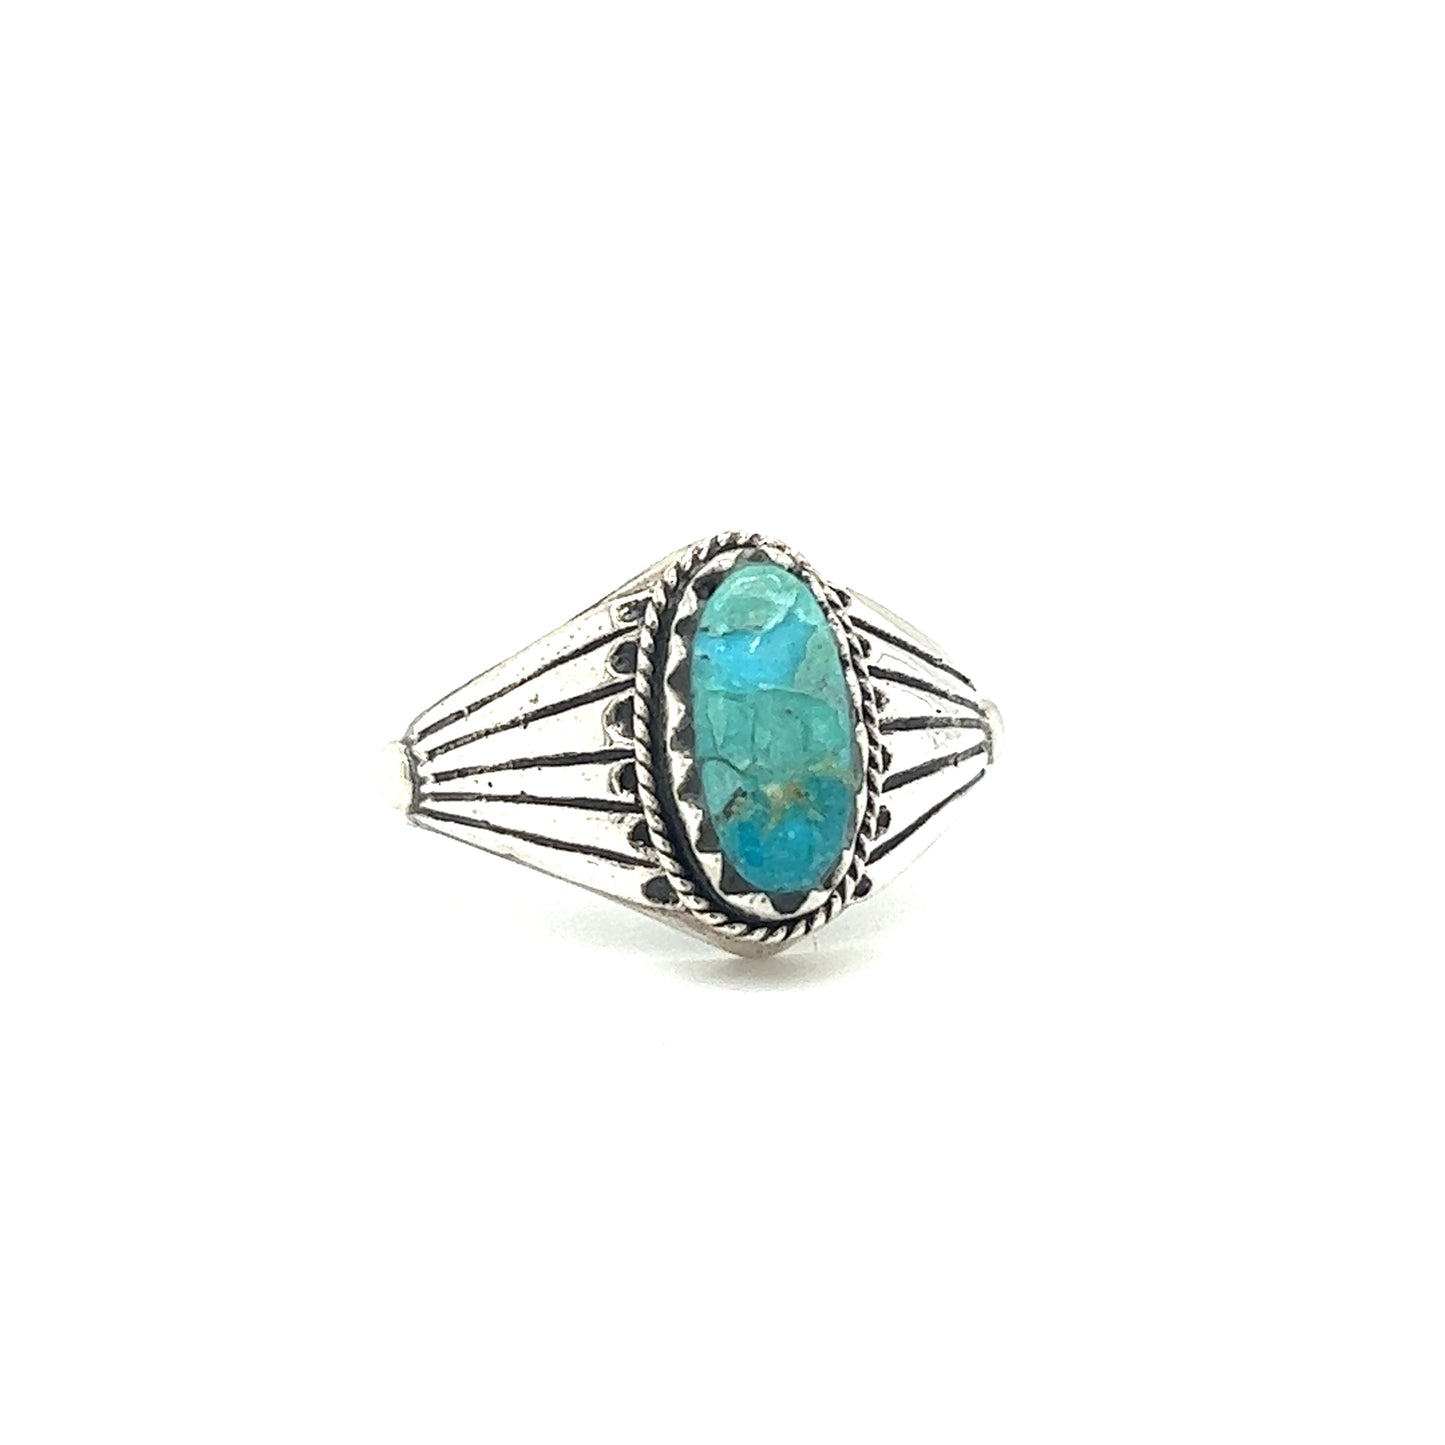 A minimalist sterling silver ring with a Southwest Inspired Kingman Turquoise Ring.